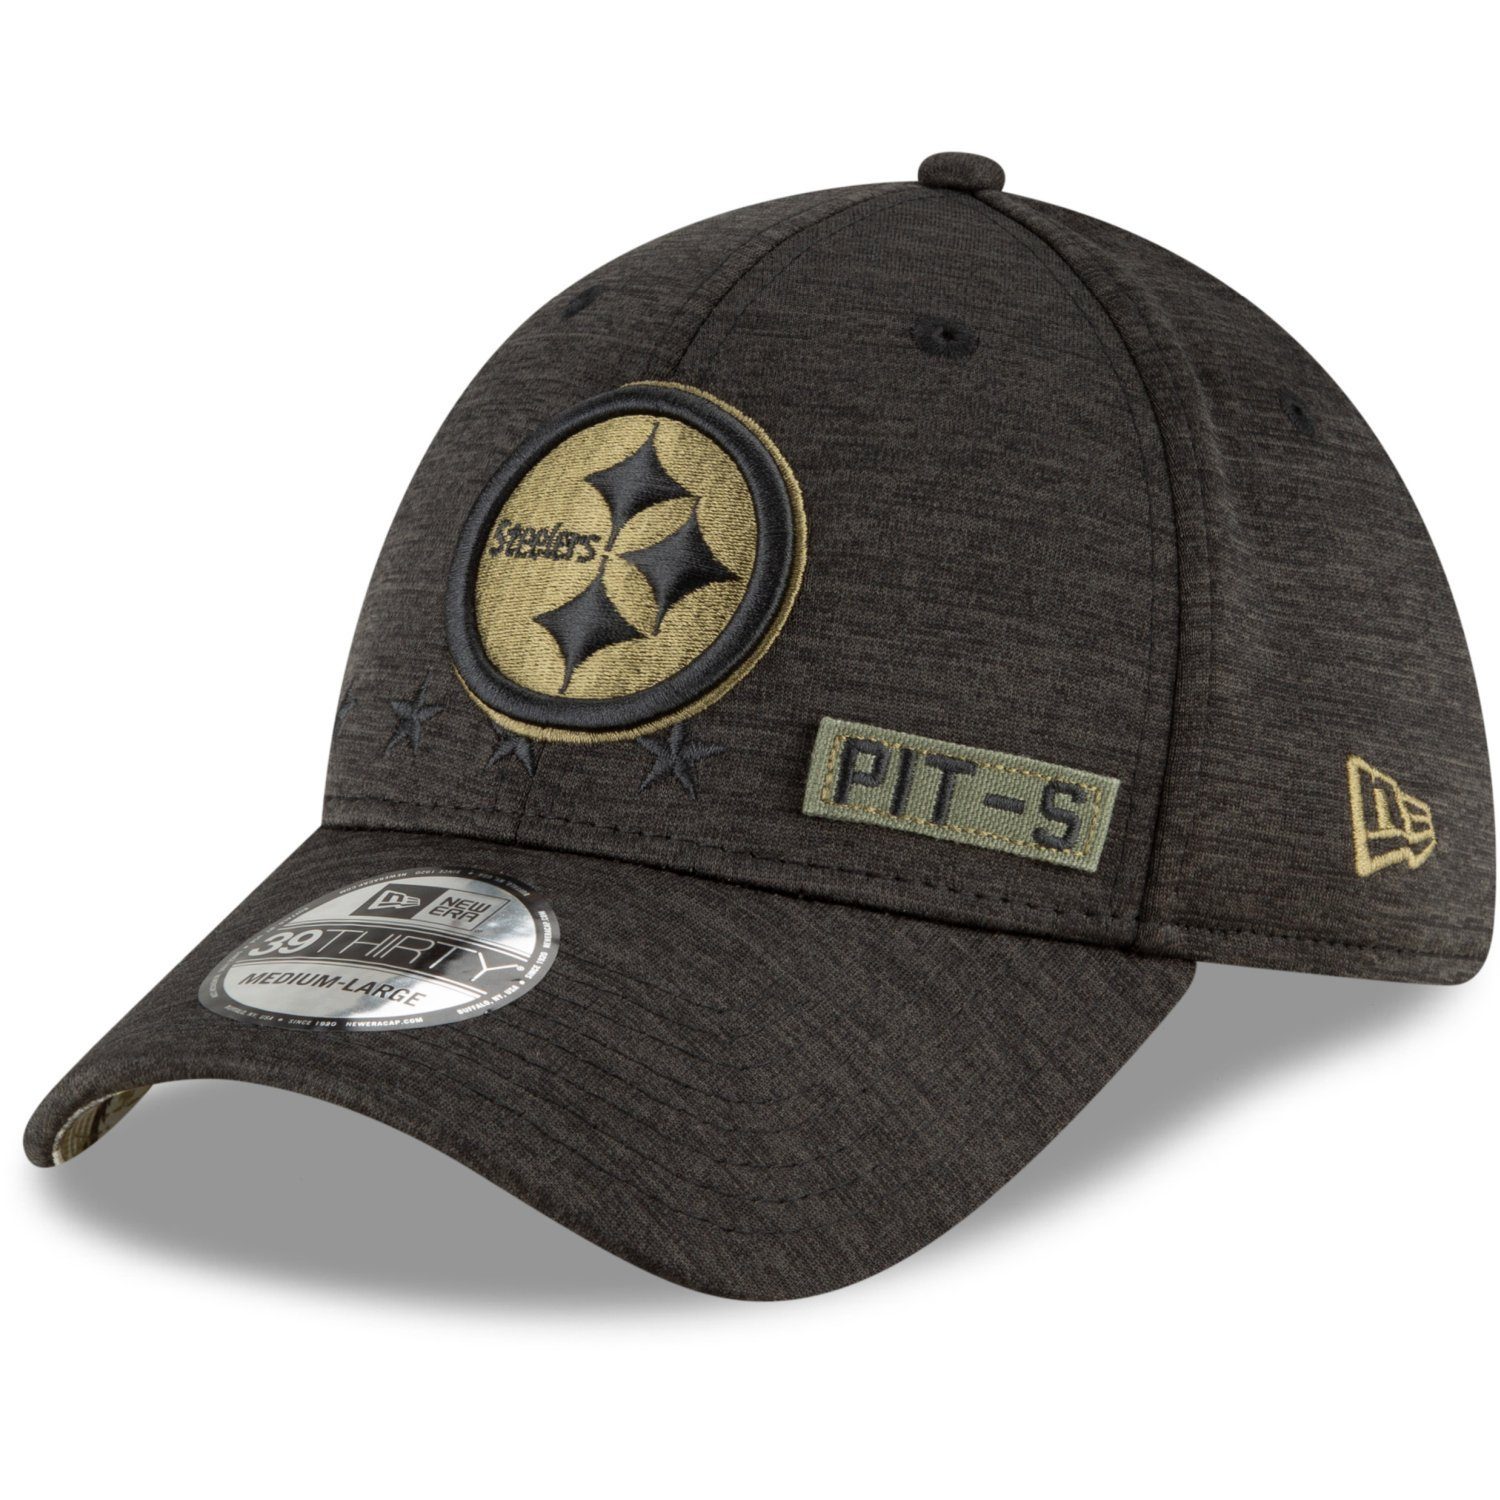 Salute Teams NFL Steelers Pittsburgh 2020 New to Flex Cap 39Thirty Service Era